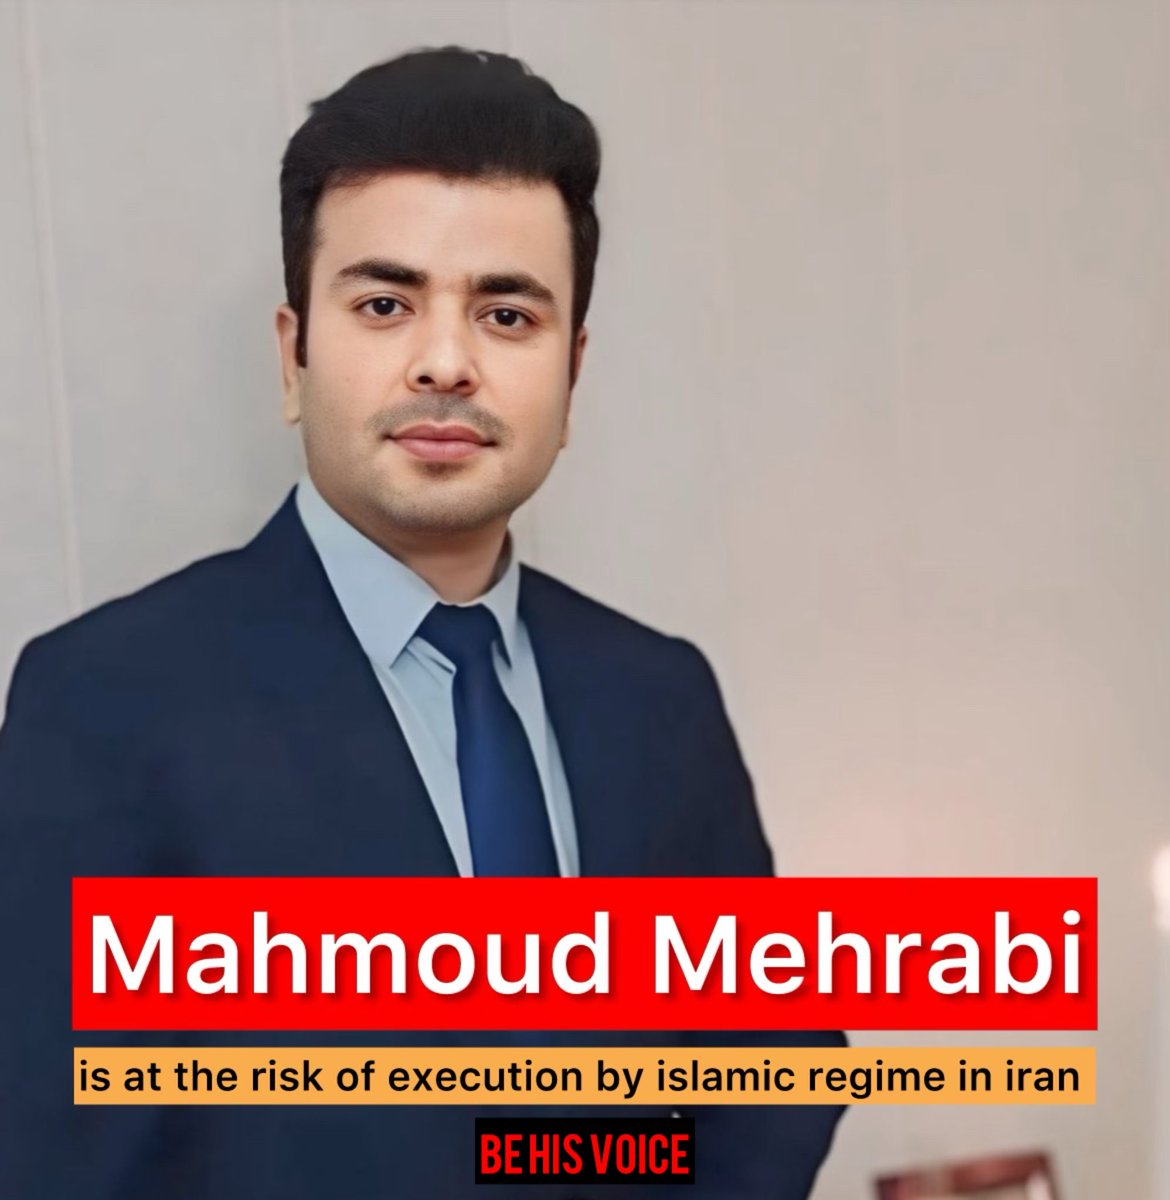 #MahmoudMehrabi
is at the risk of execution by islamic regime in iran 

SAY HIS NAME 
#MahmoudMehrabi
#MahmoudMehrabi
#MahmoudMehrabi 

#StopExecustionsInIran